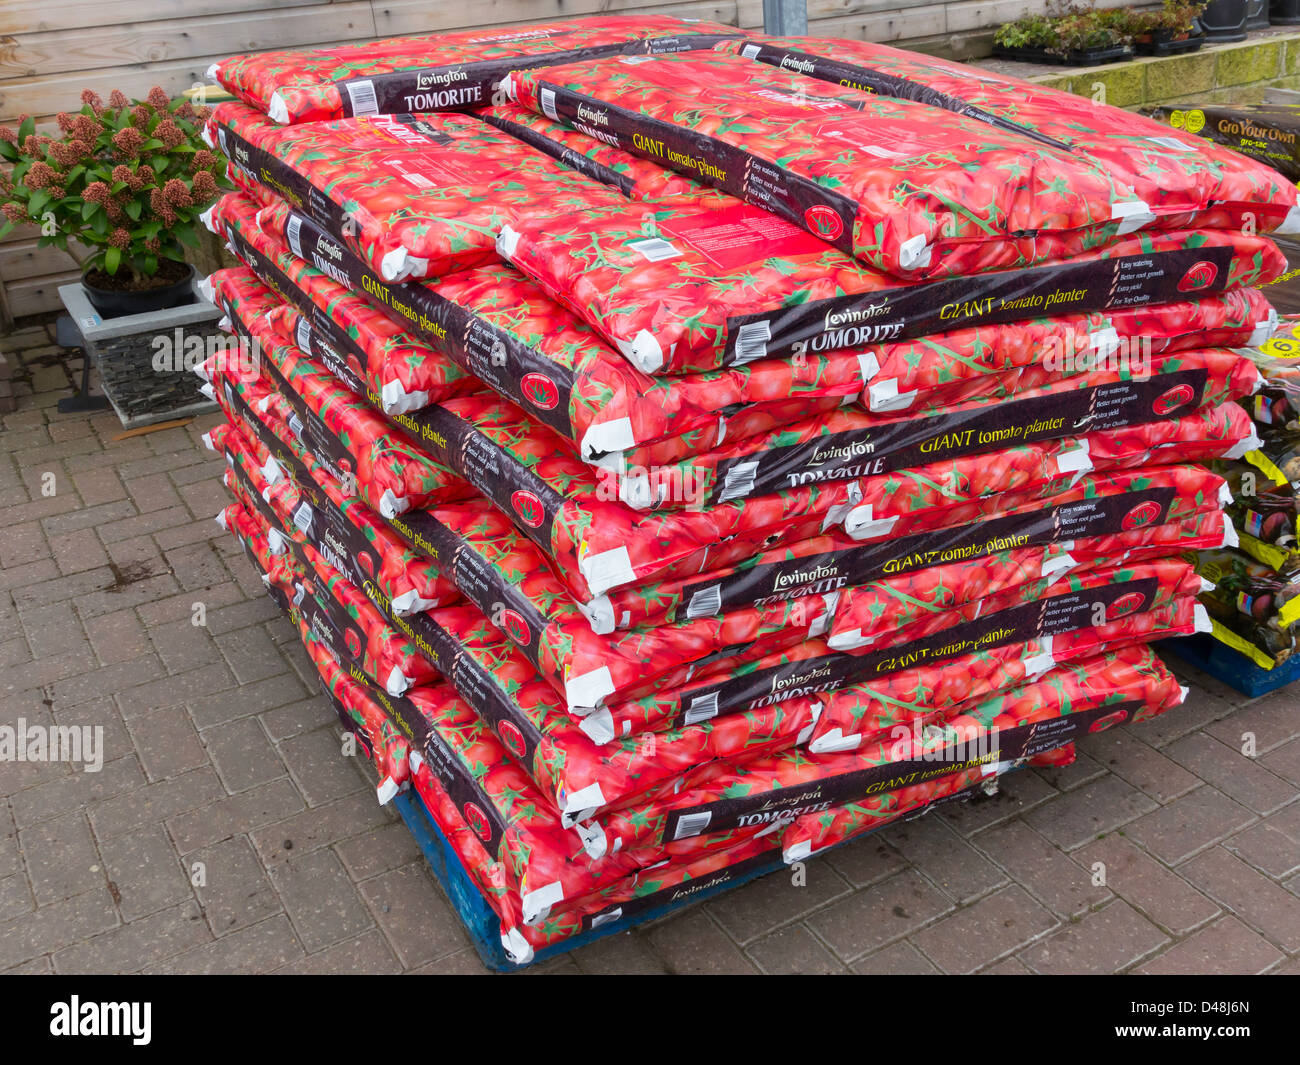 A stack of red grow bags in a garden centre used for growing tomato plants Stock Photo